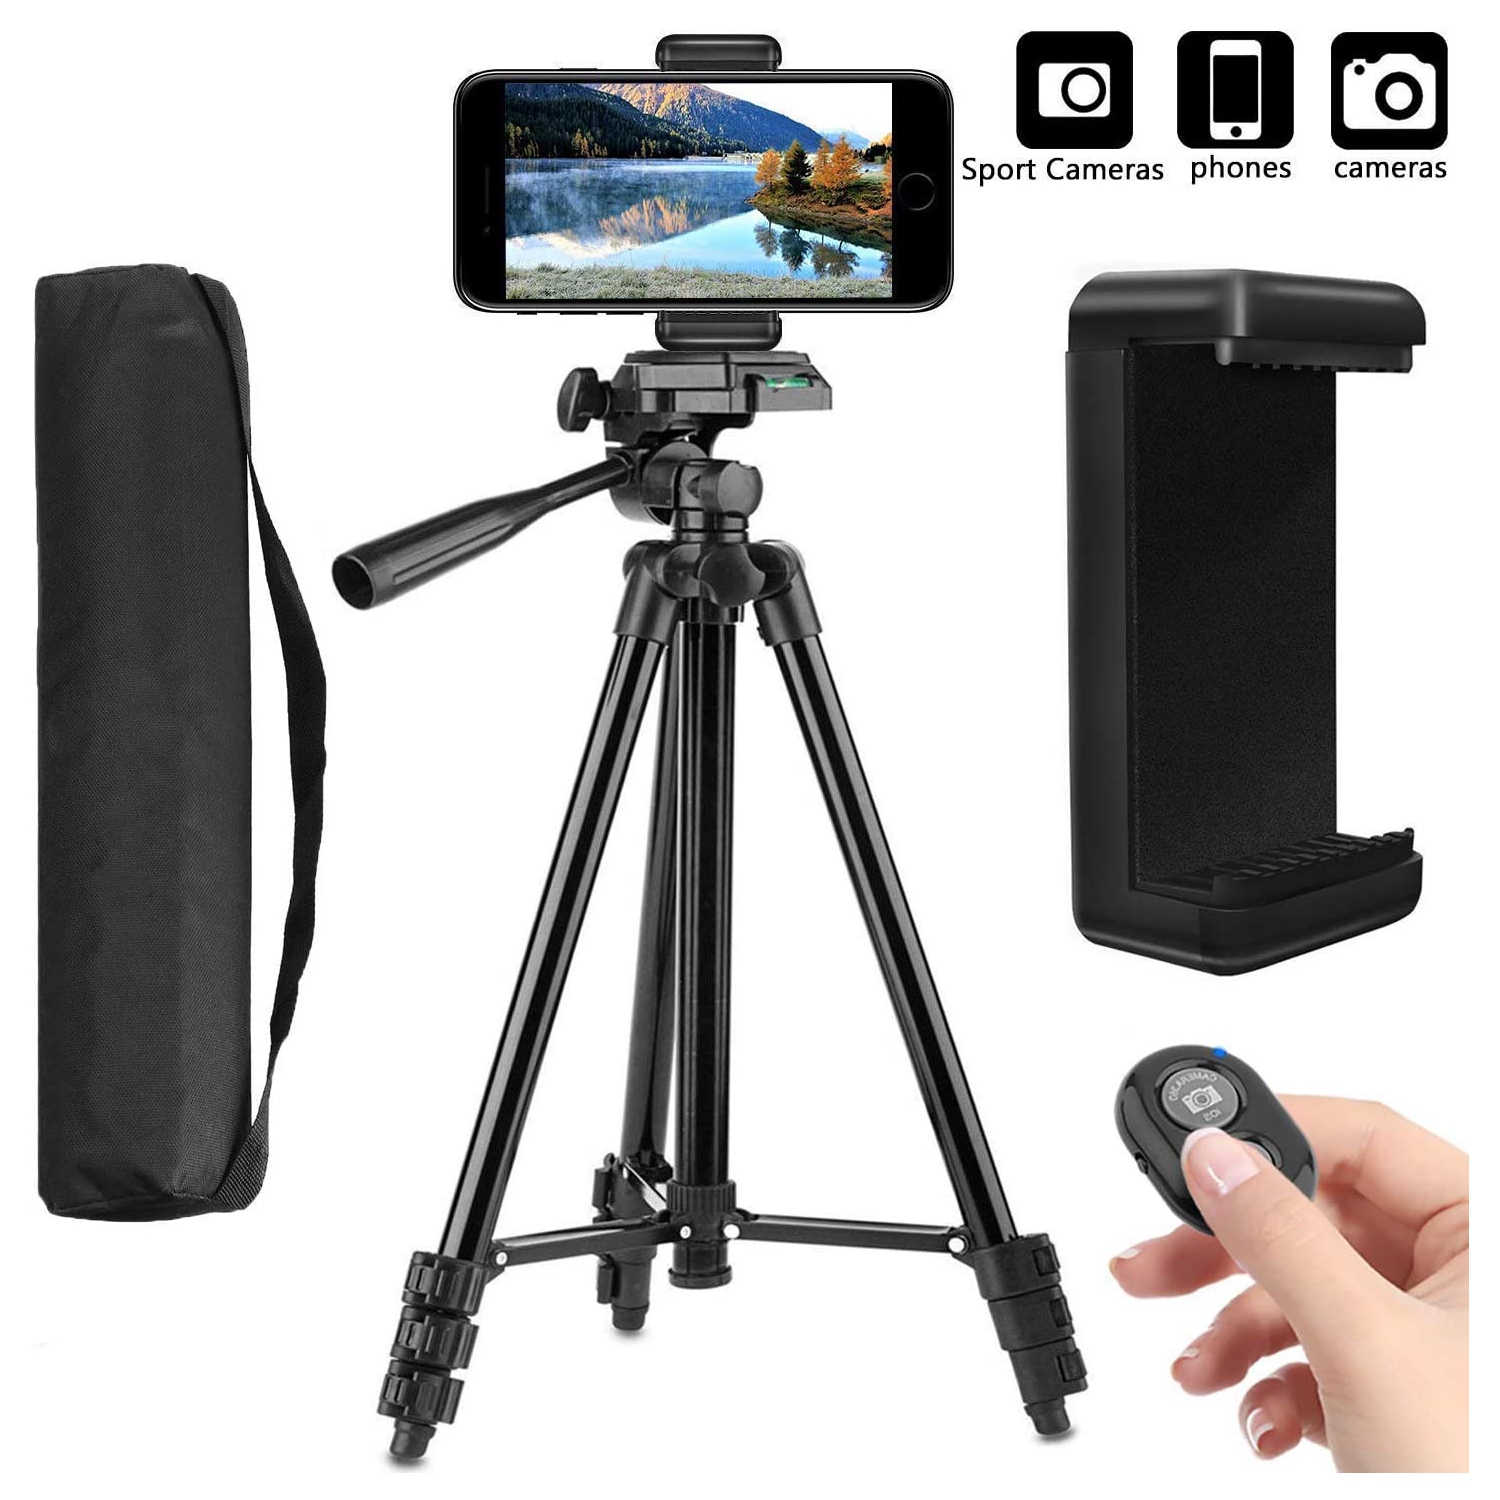 Tripod for Cell Phone, [3 in 1] 42'' Aluminum Camera Tripod with Universal Cell Phone Holder Mount and Wireless Bluetooth Remote Shutter, Compatible for iPhone, Samsung, DSLR and More -Wingomart